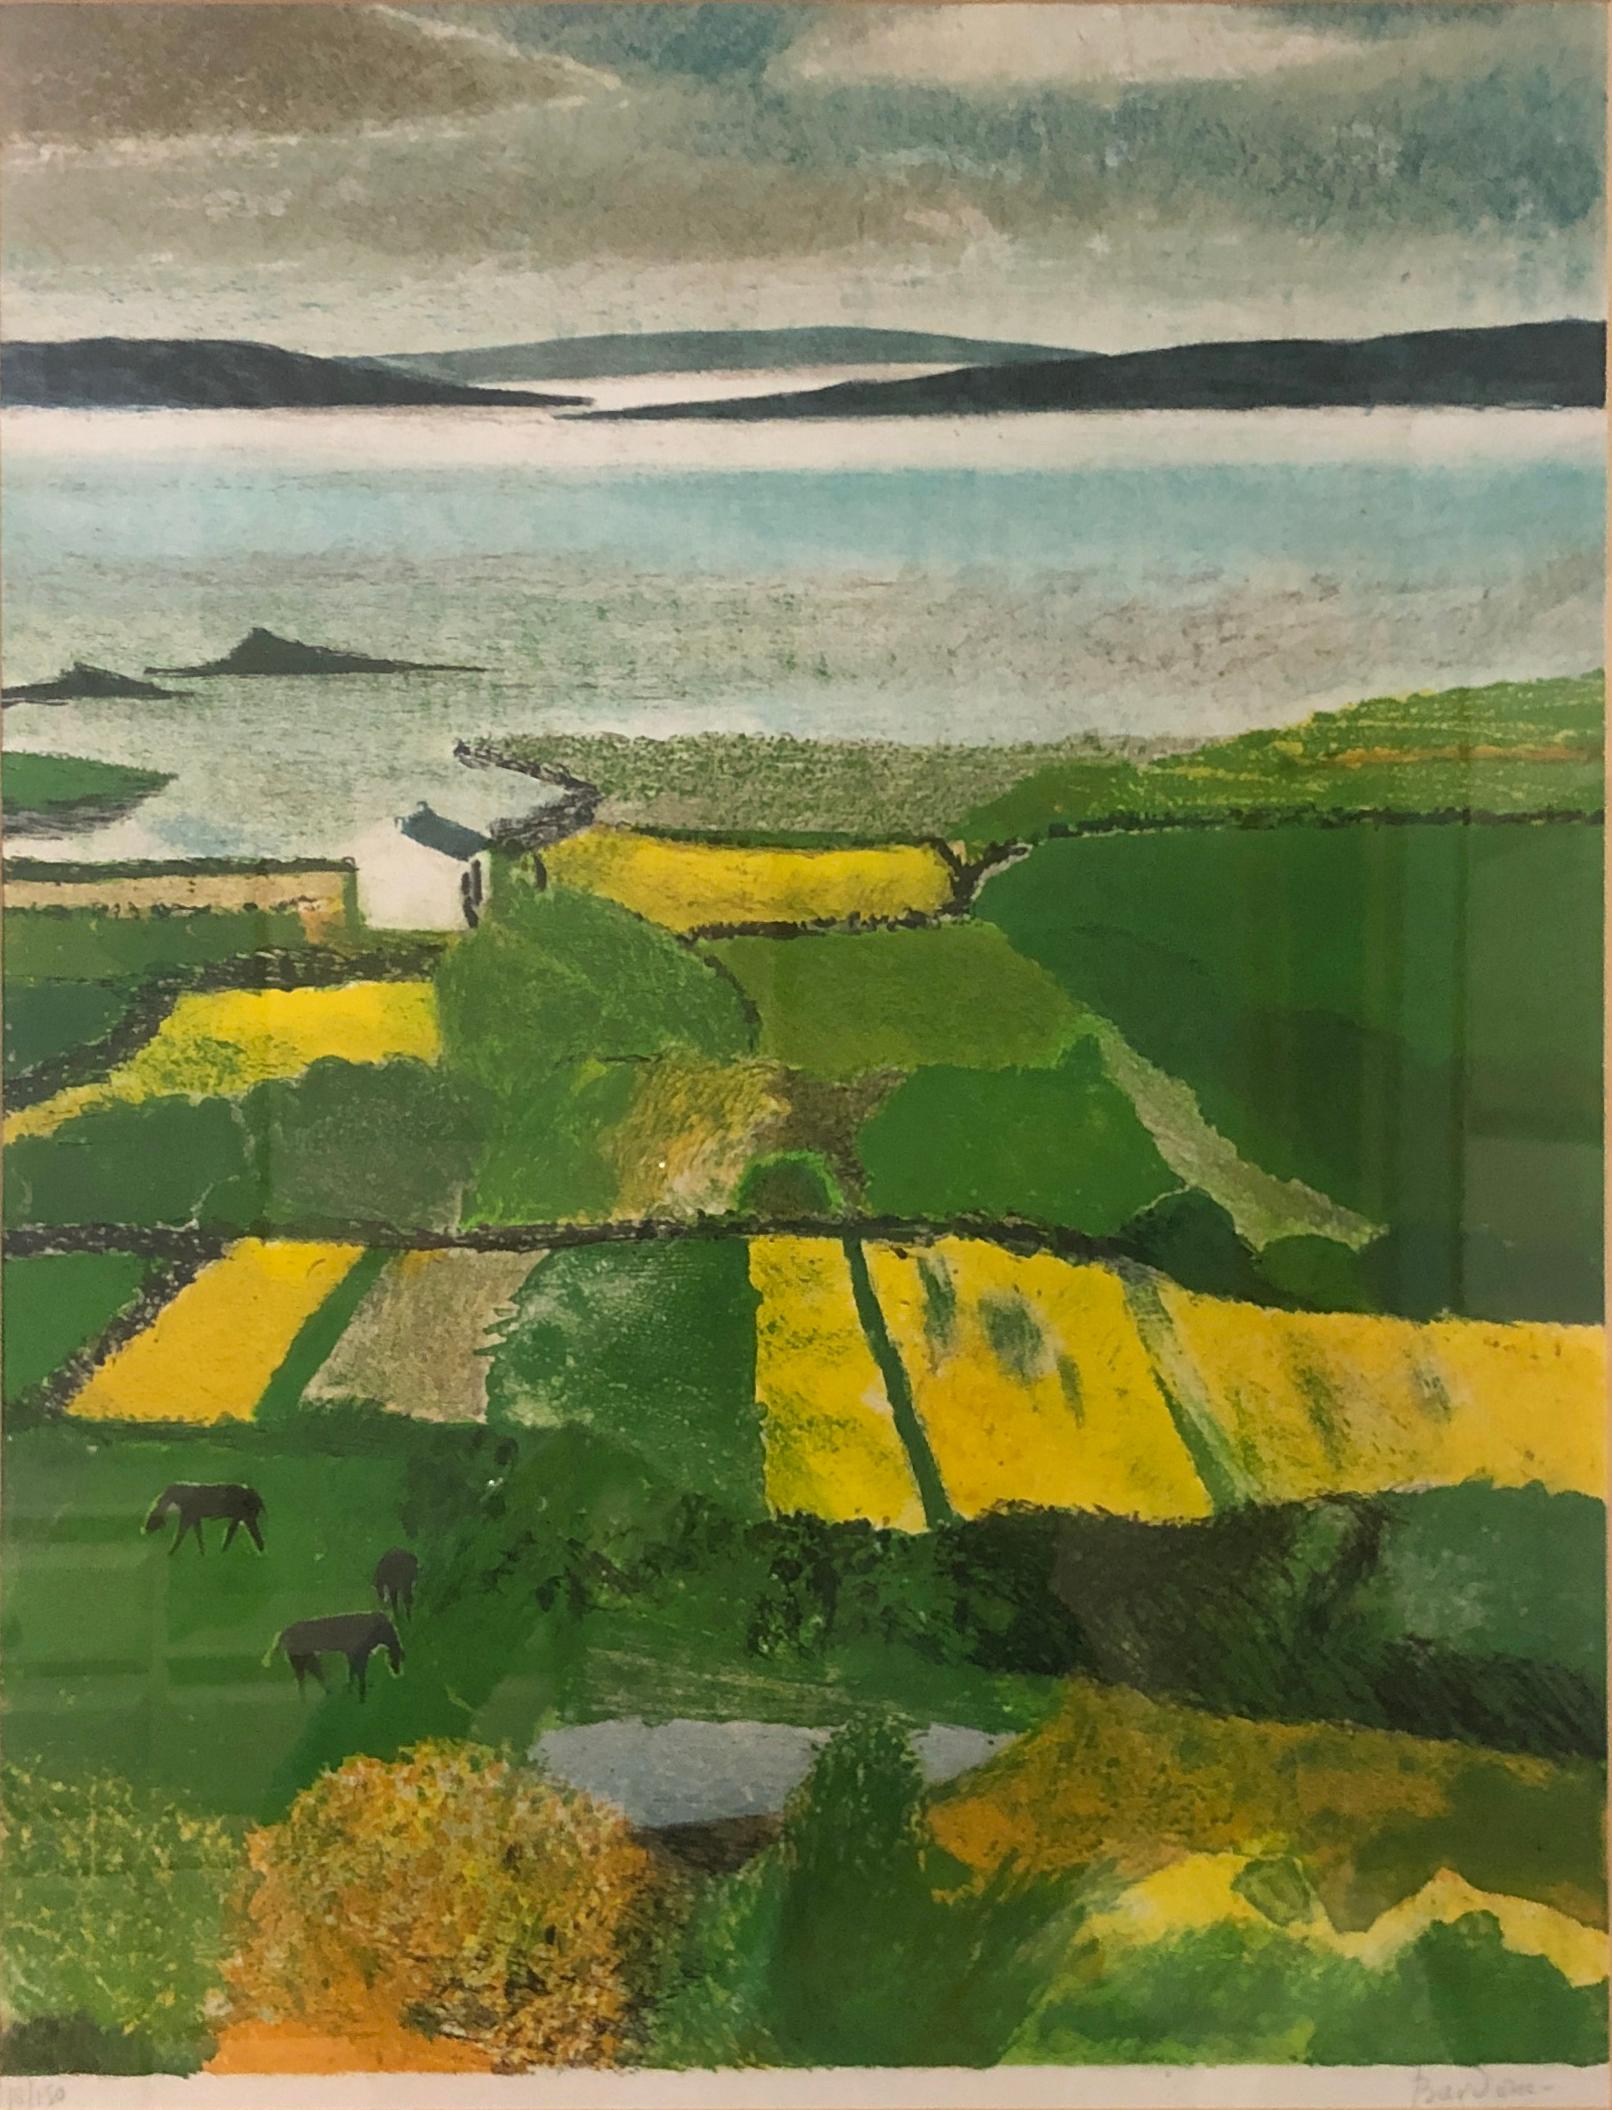 A vertical landscape painting lithographic print of bucolic Irish fields in emerald green and gold by Guy Bardone. Bardone was a master of light and mood, seen here in the calm yet inviting rural scene. Grassy fields seem to shine from light peeking